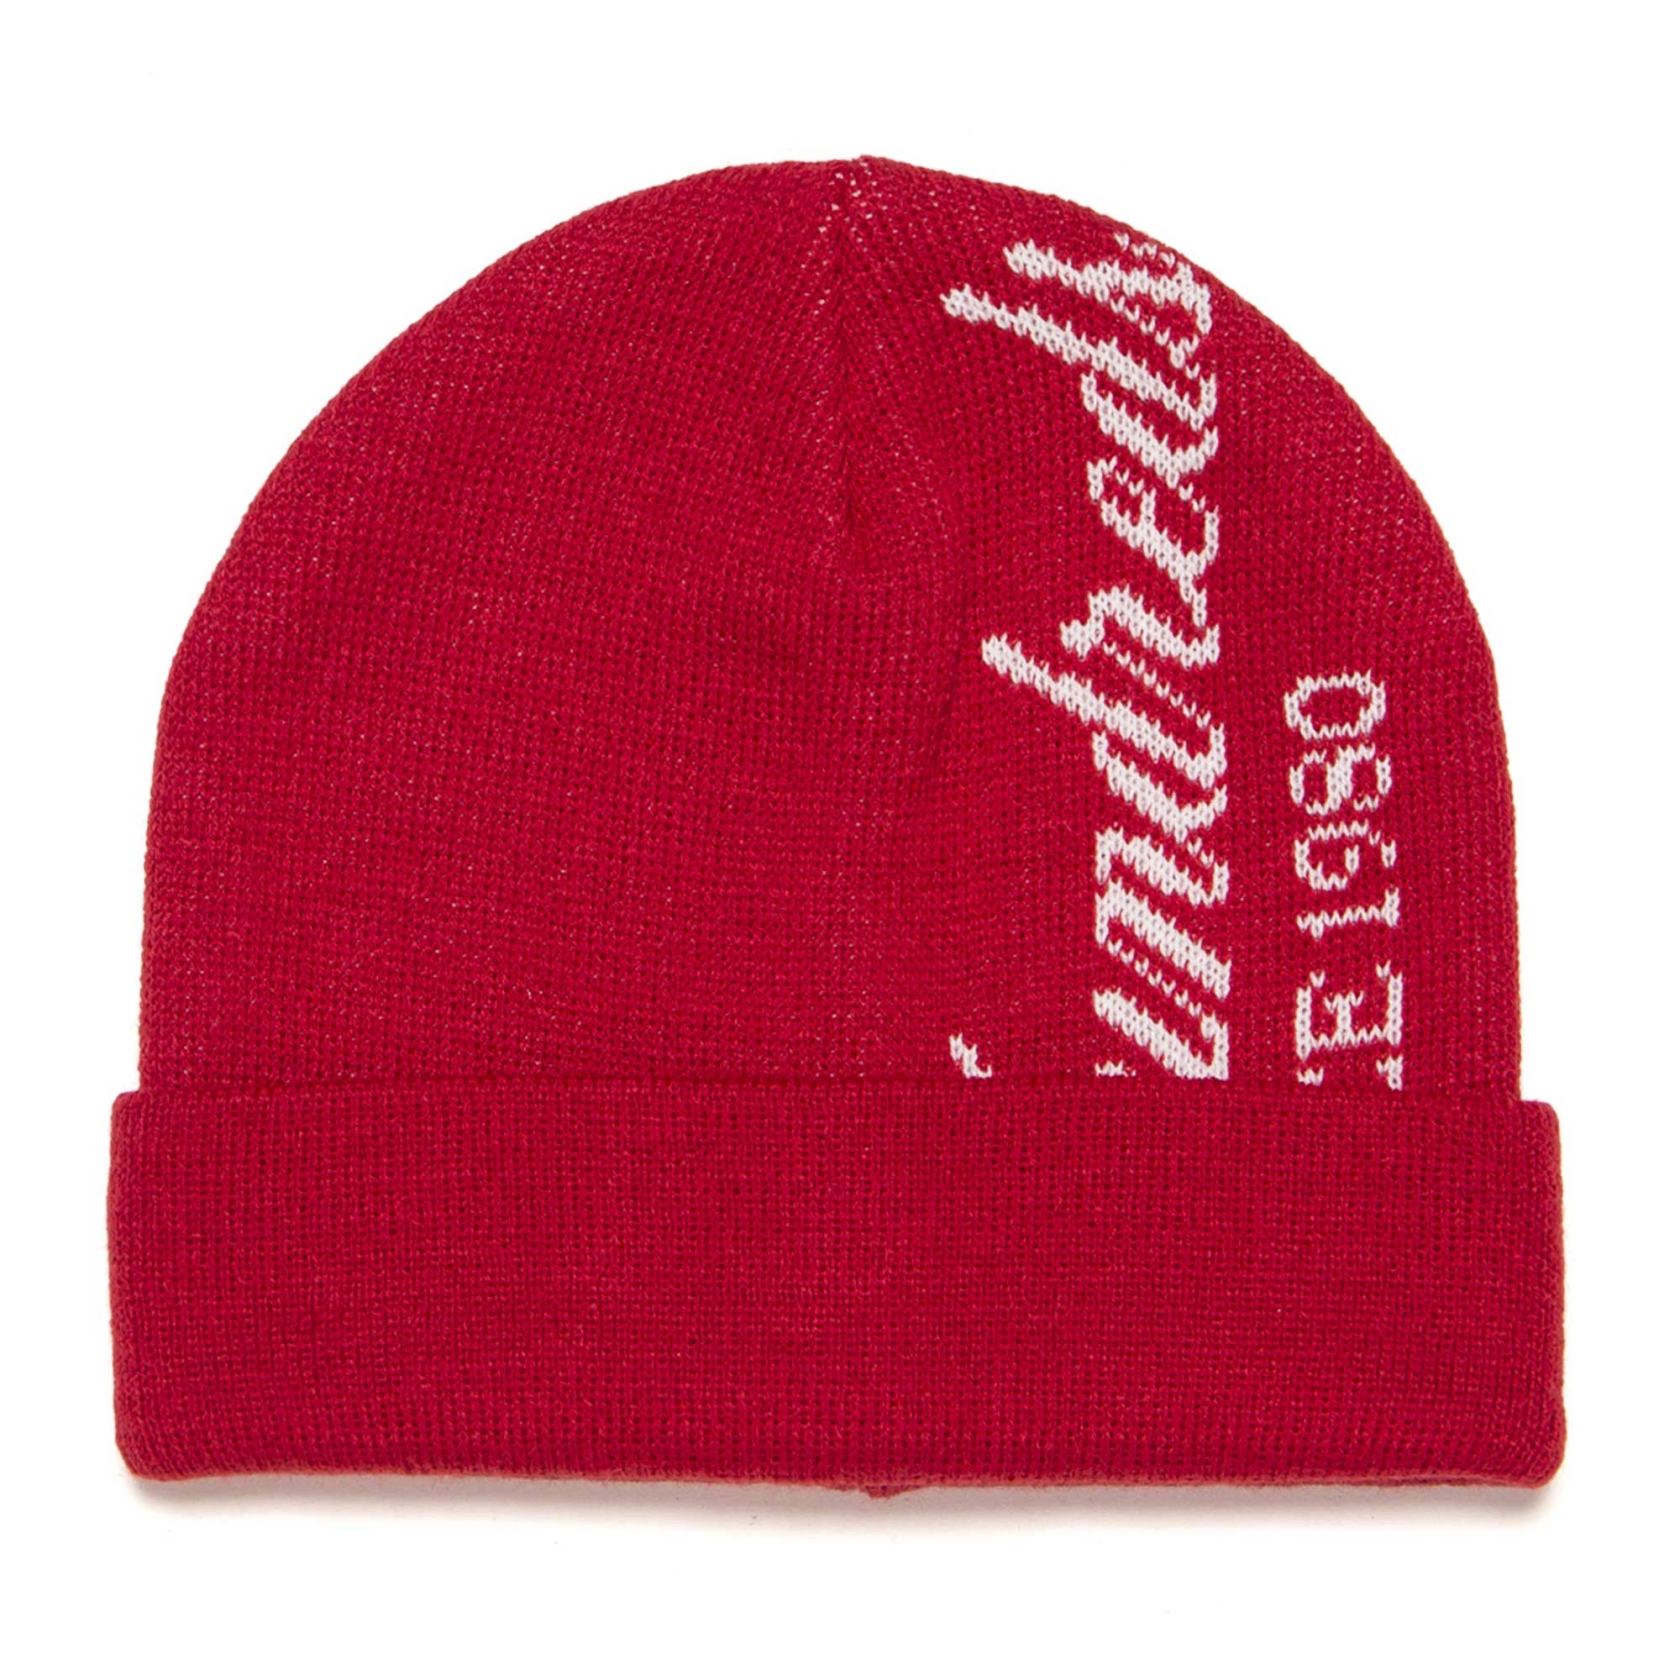 THE HUNDREDS Beanie ROLL UP, red